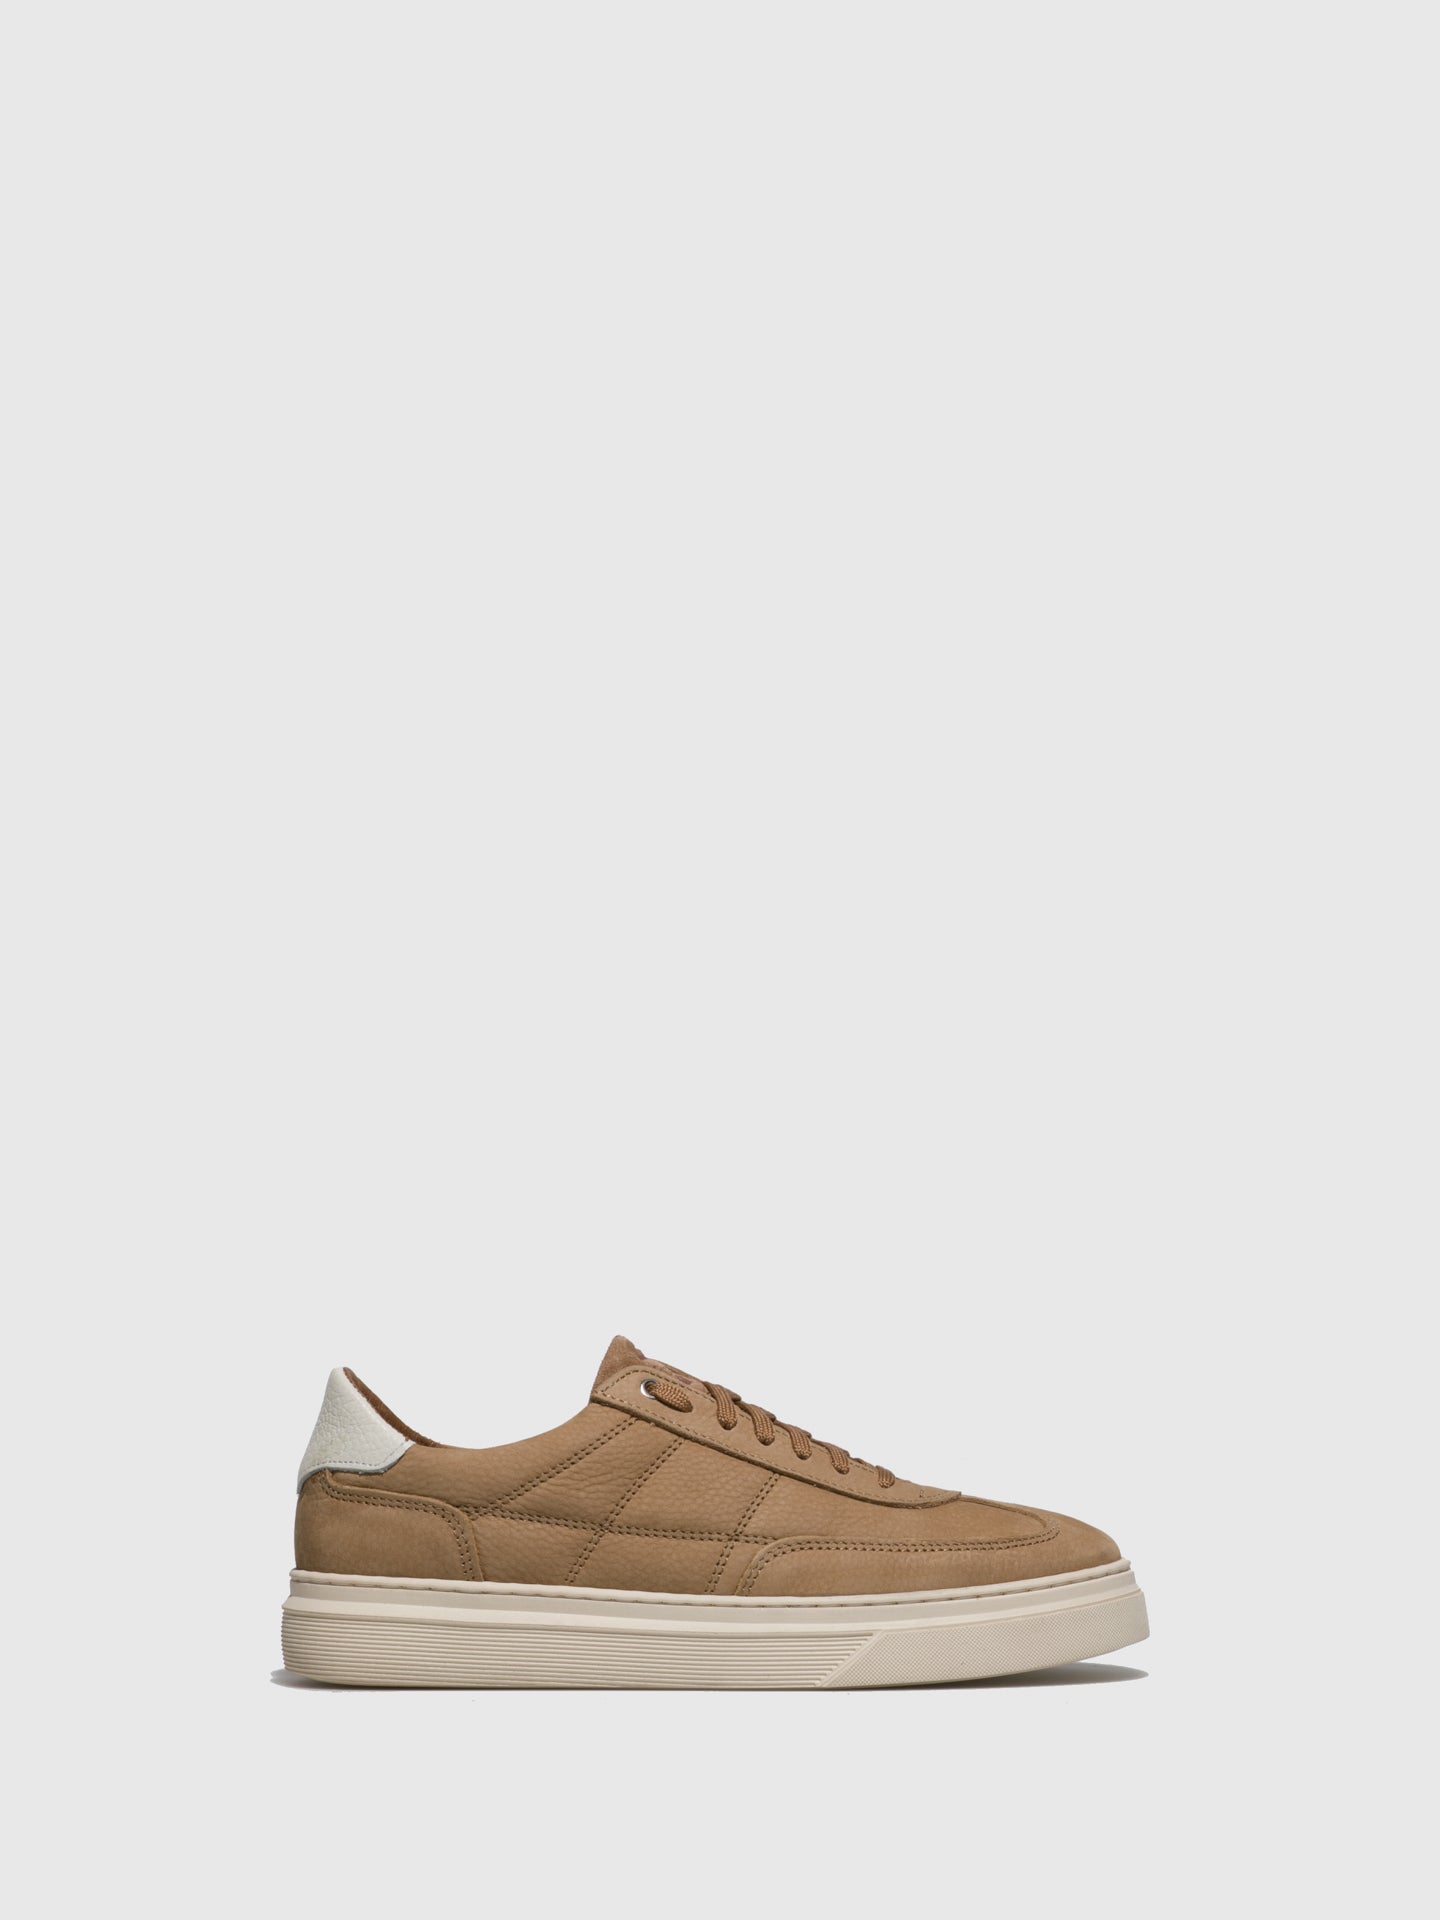 Fungi Beige Lace-up Trainers